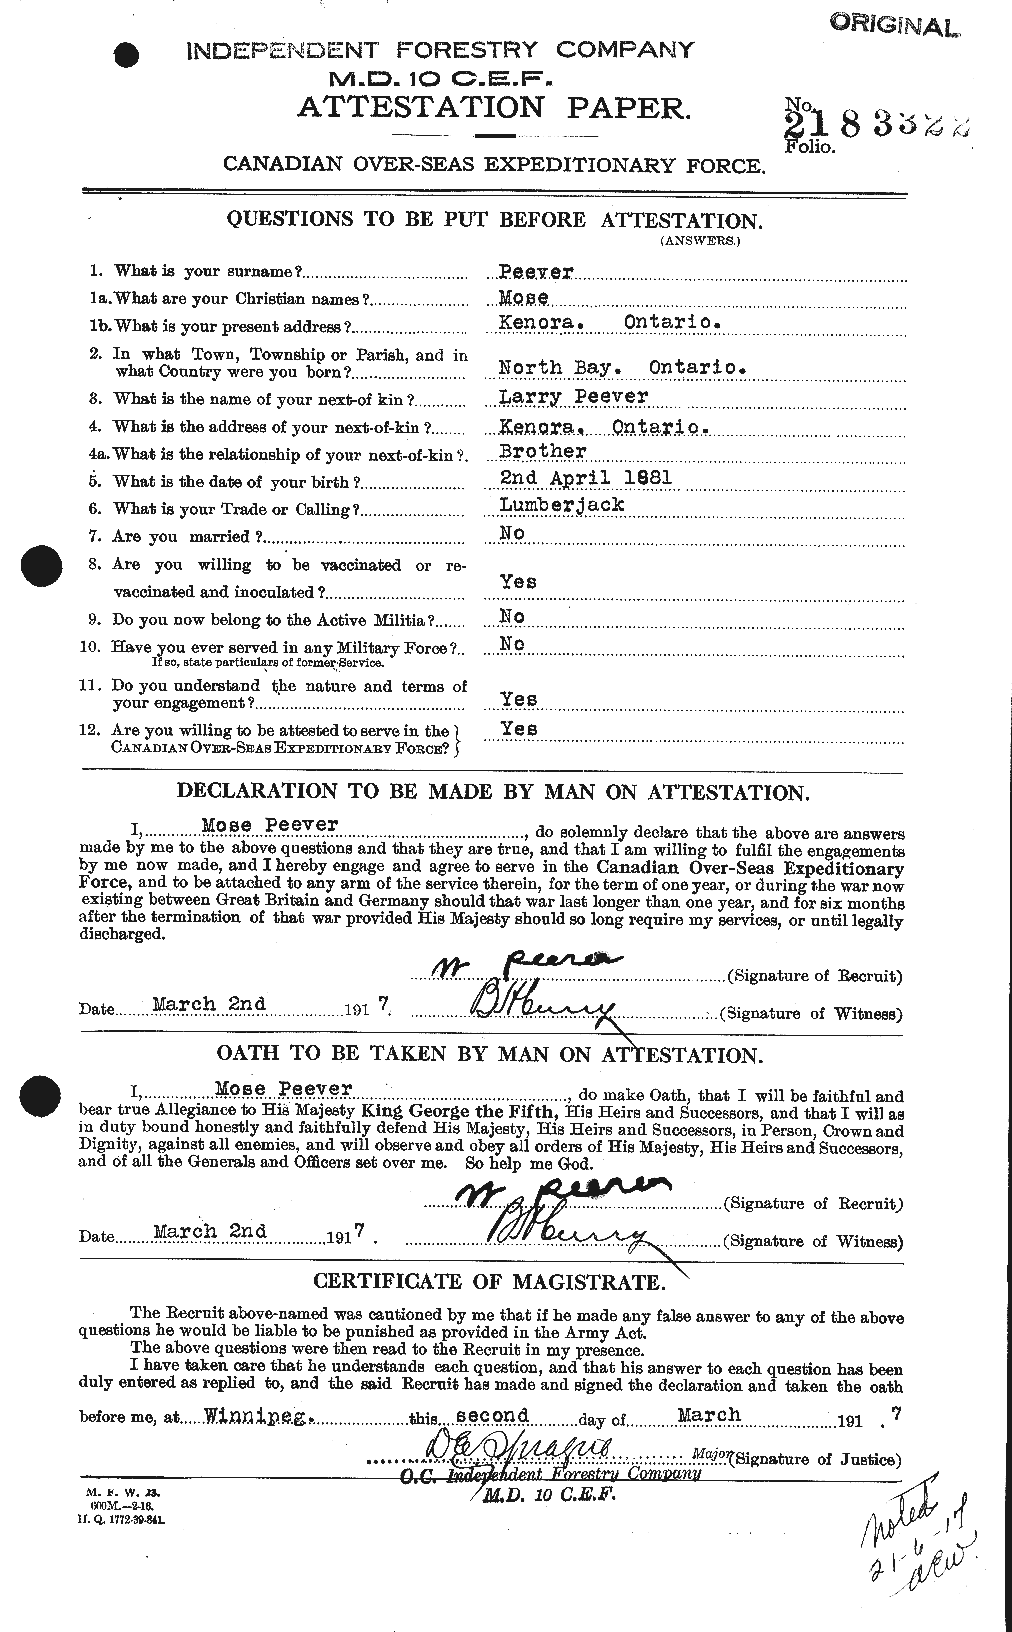 Personnel Records of the First World War - CEF 571965a